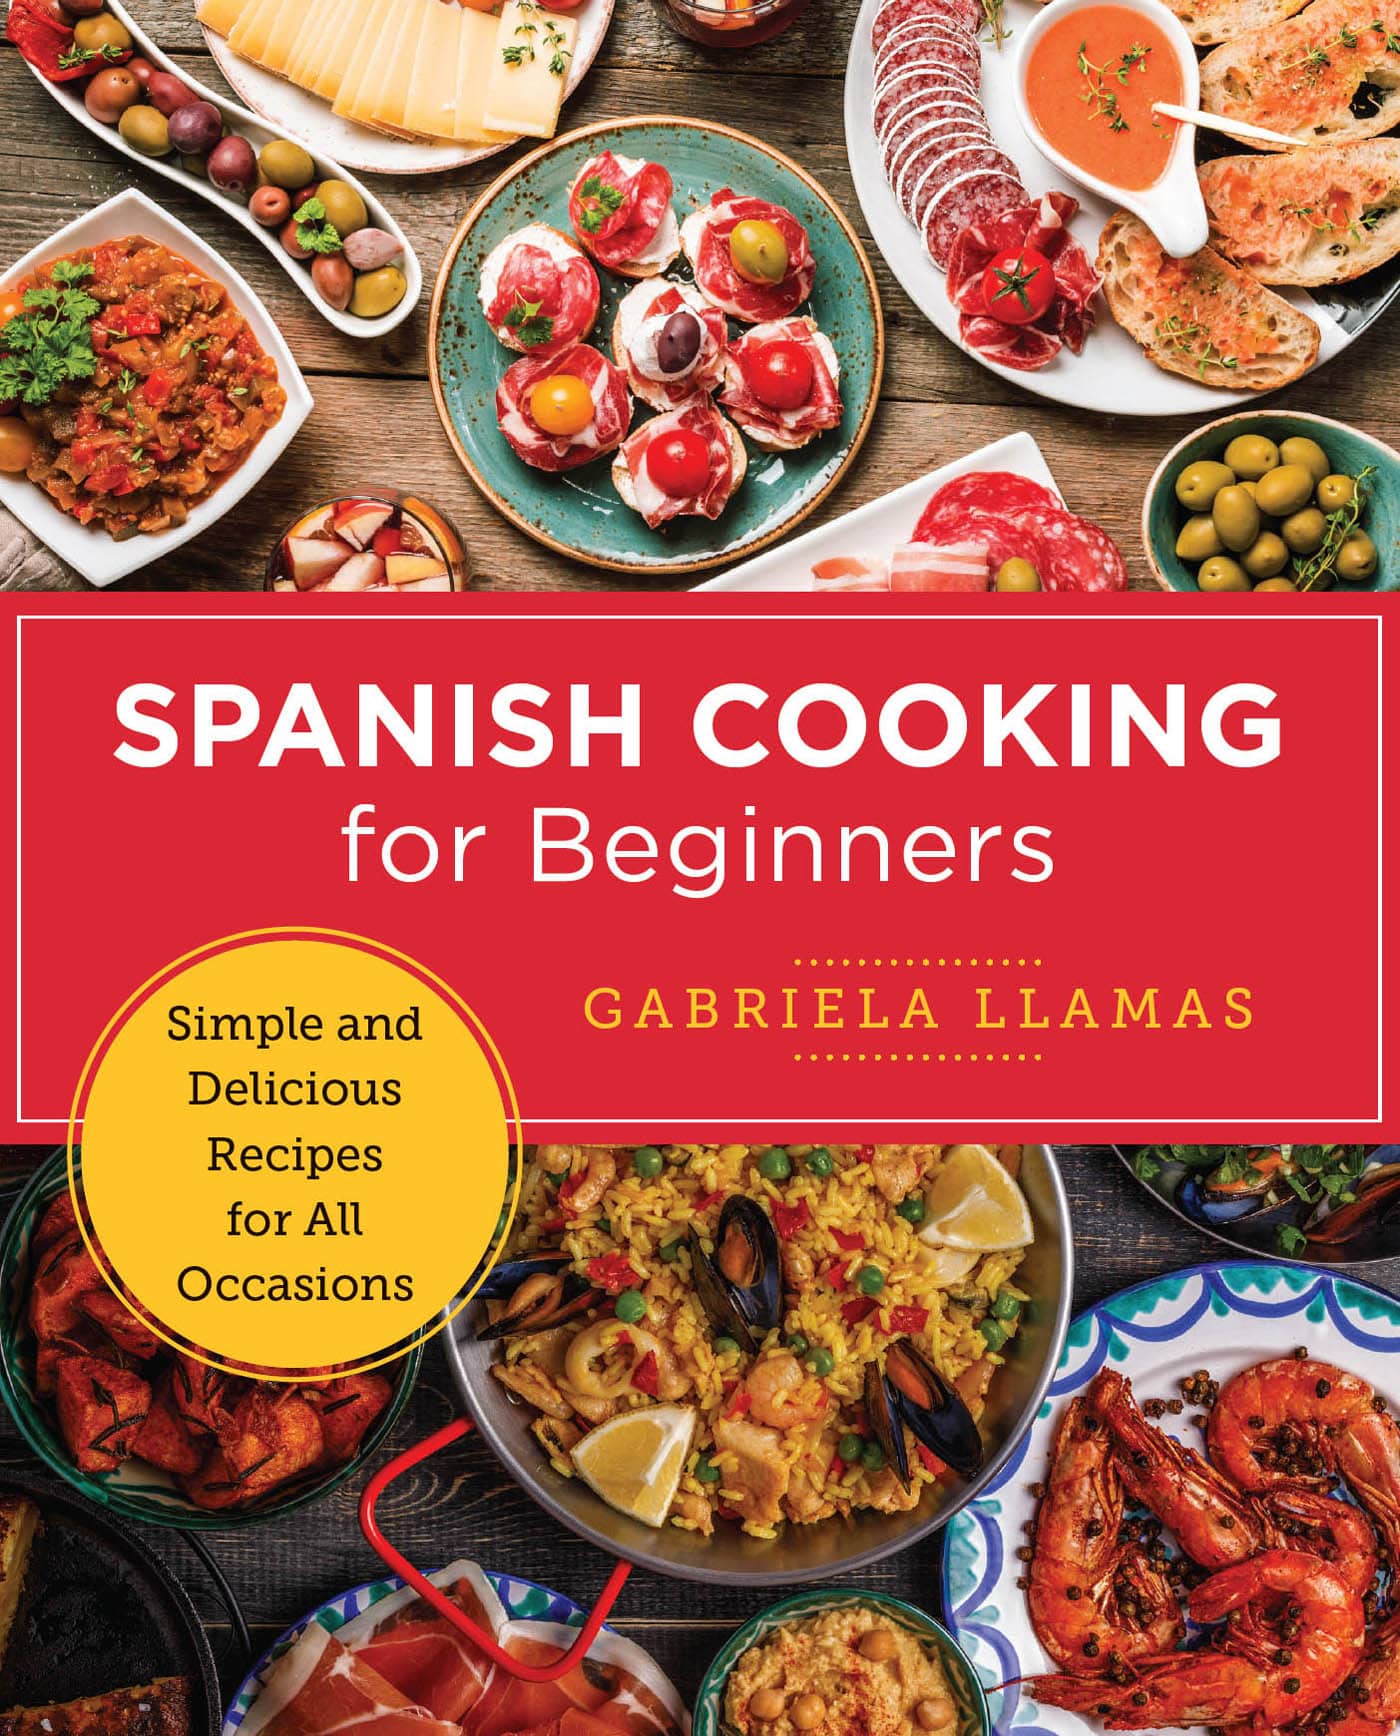 SPANISH COOKING for Beginners GABRIELA LLAMAS Simple and Delicious Recipes - photo 1